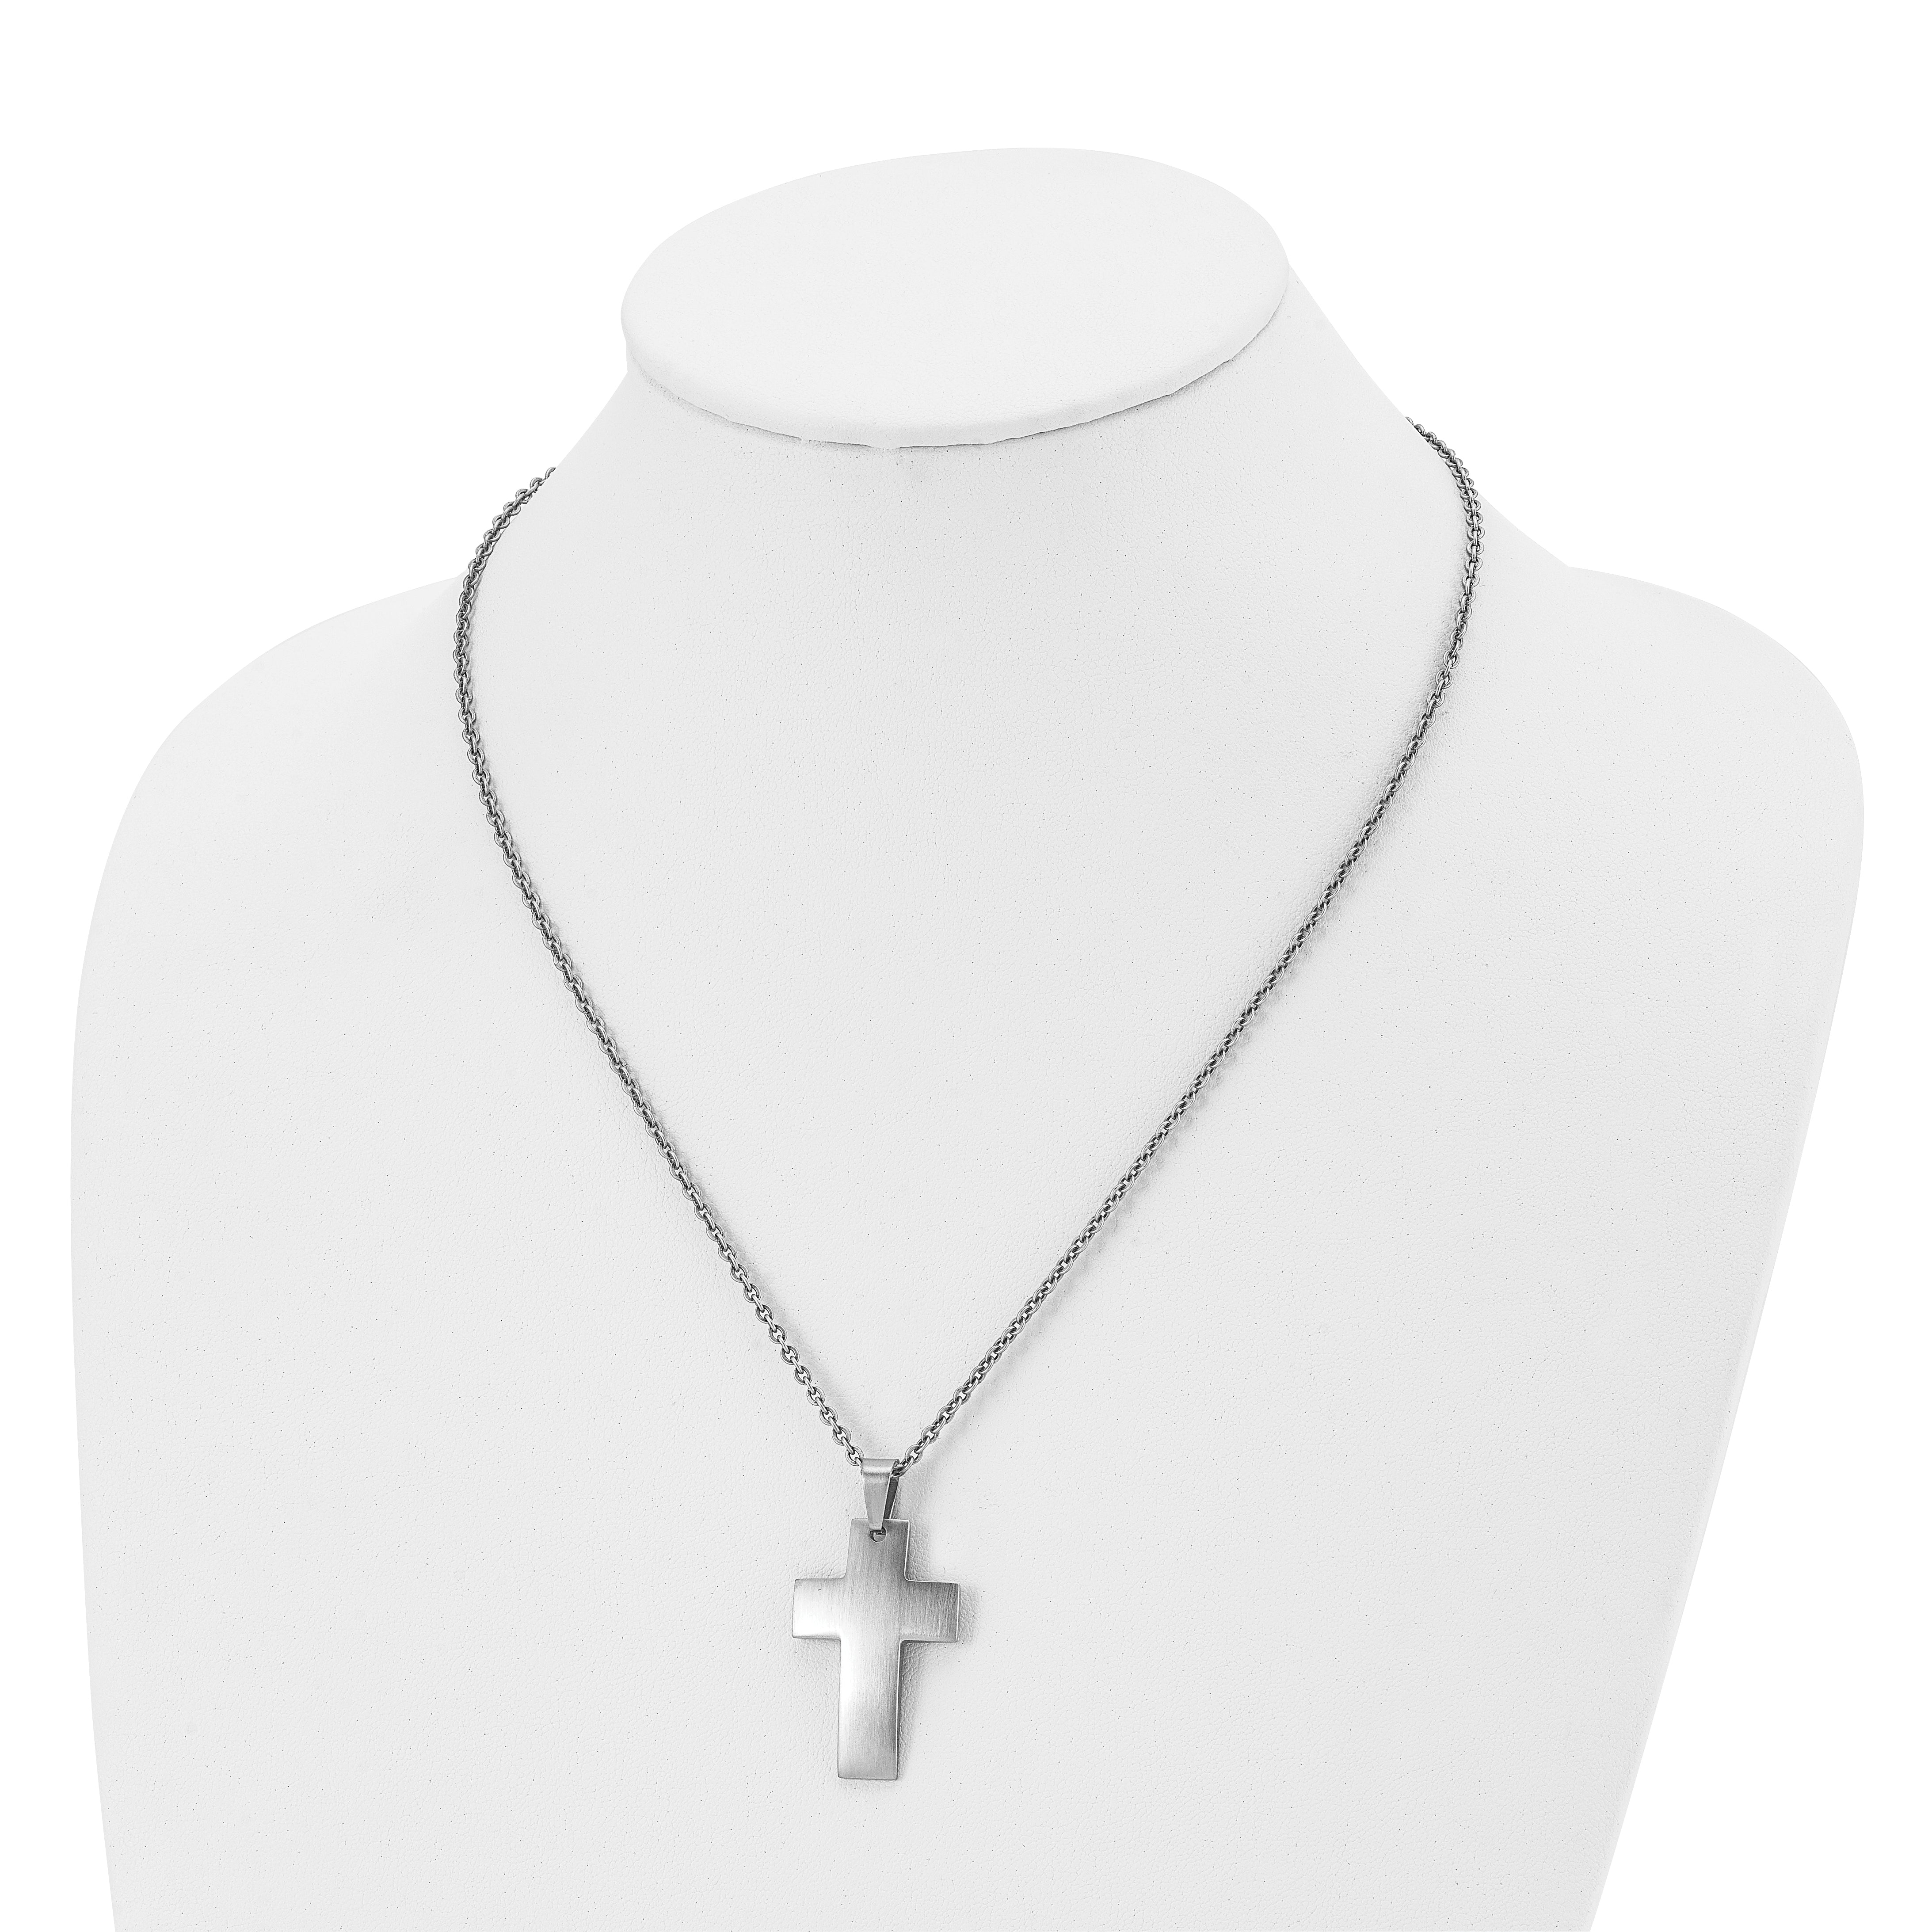 Chisel Stainless Steel Brushed Cross Pendant on a 20 inch Cable Chain Necklace